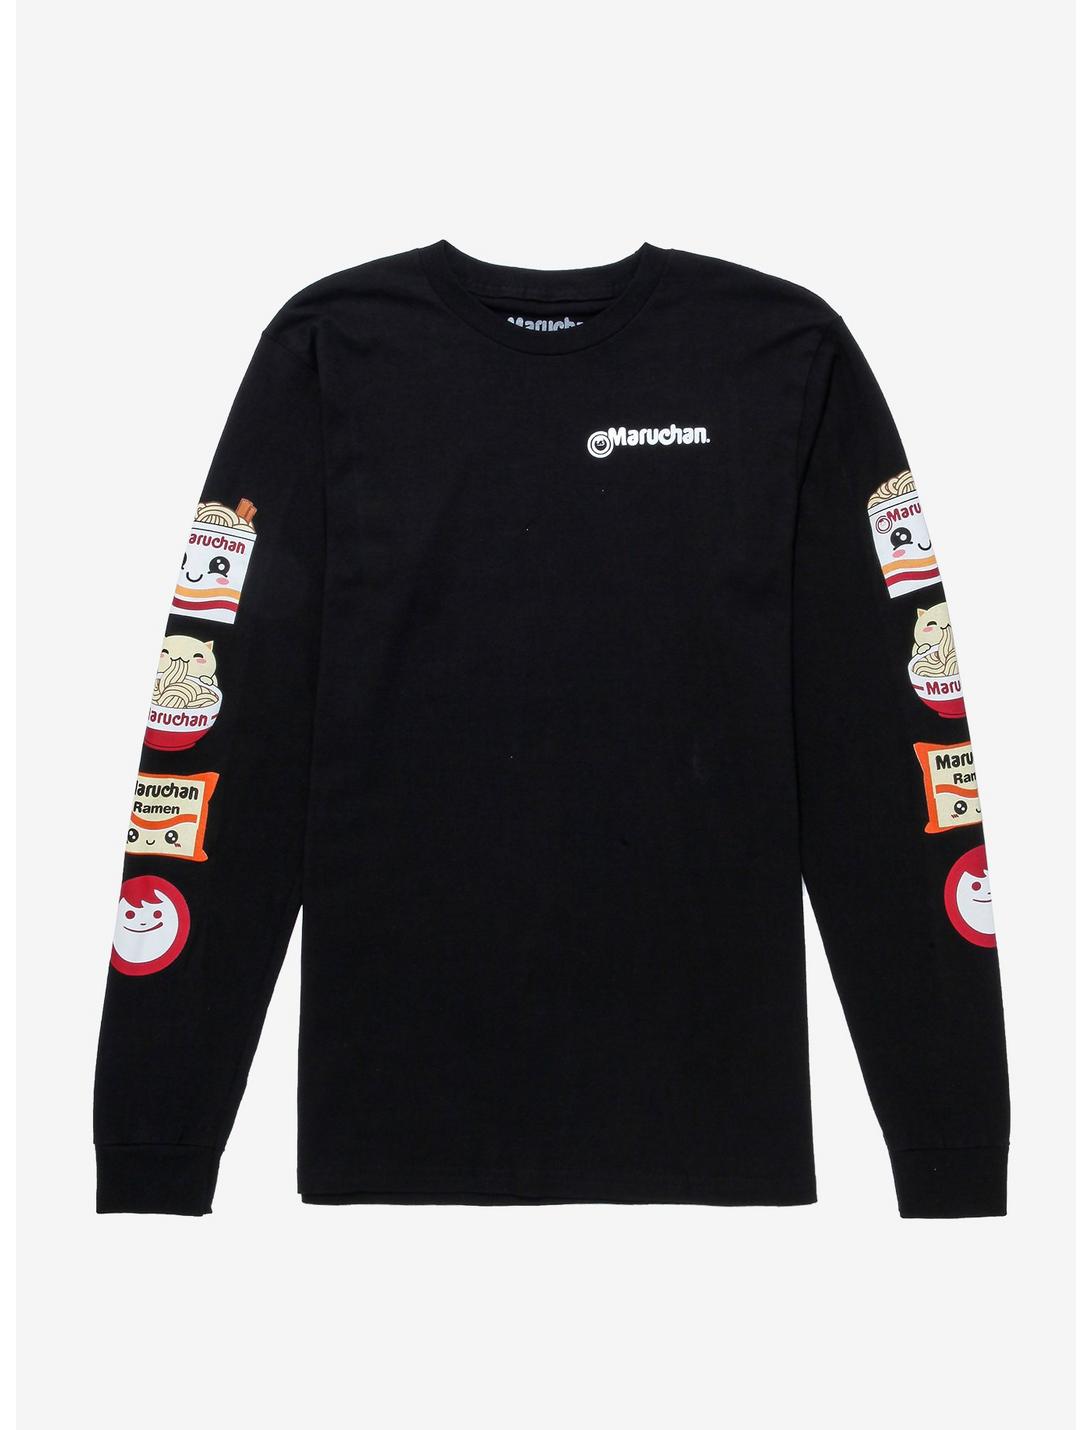 Maruchan Faces Long Sleeve T-Shirt - BoxLunch Exclusive | BoxLunch